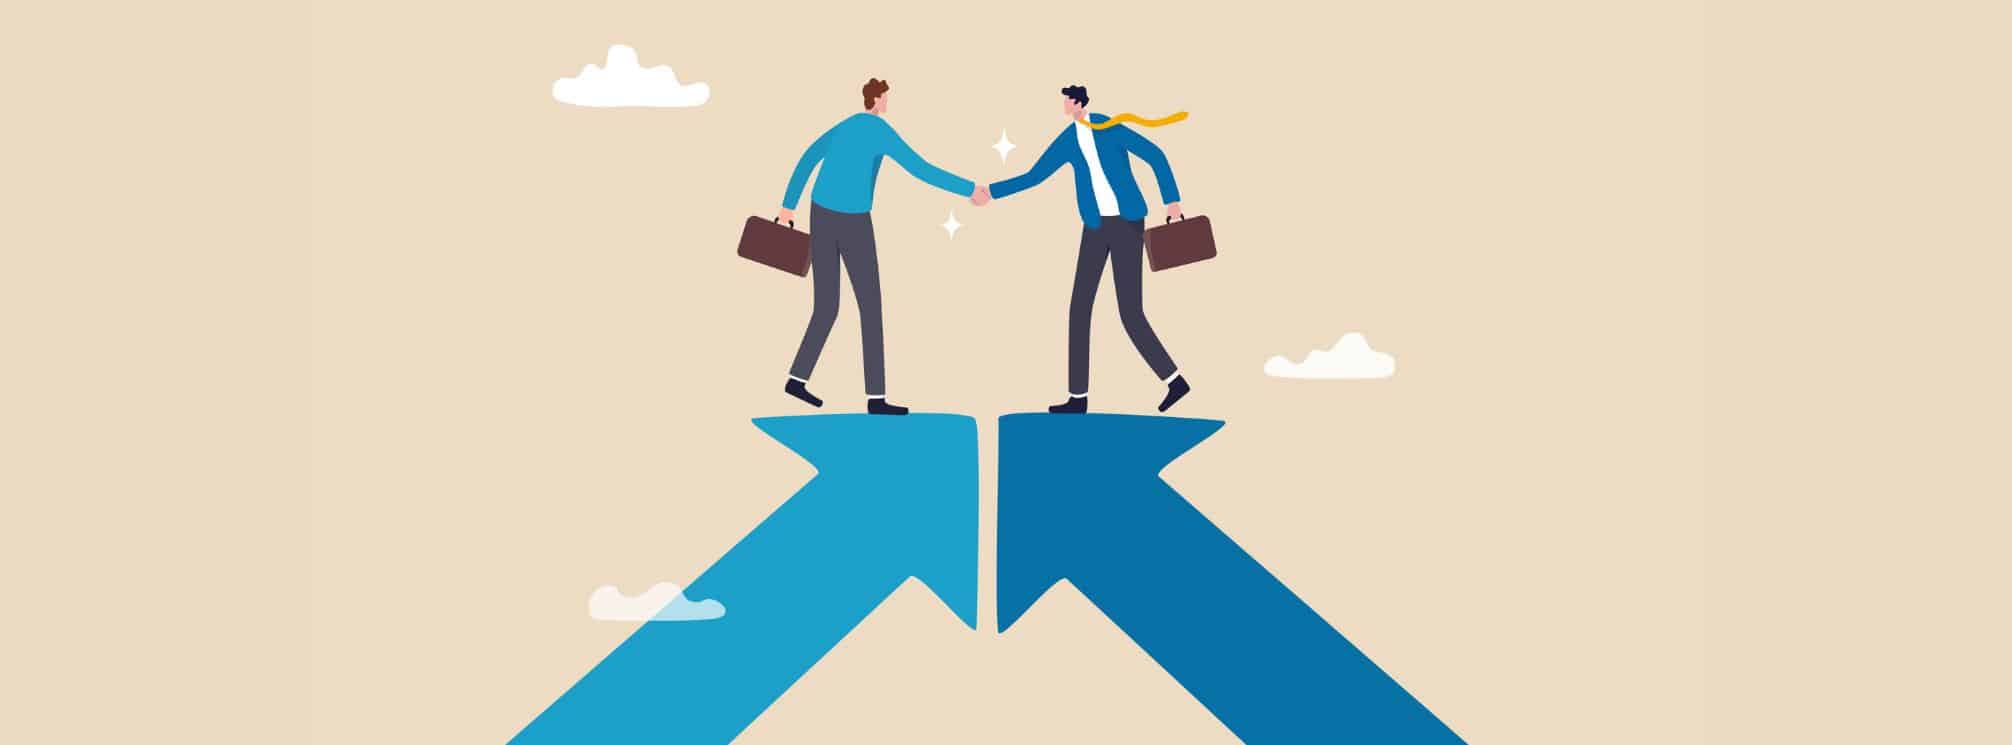 merger and acquisition flat art illustration. Two arrows coming together with illustration of two professionals standing on the arrows and shaking hands. 